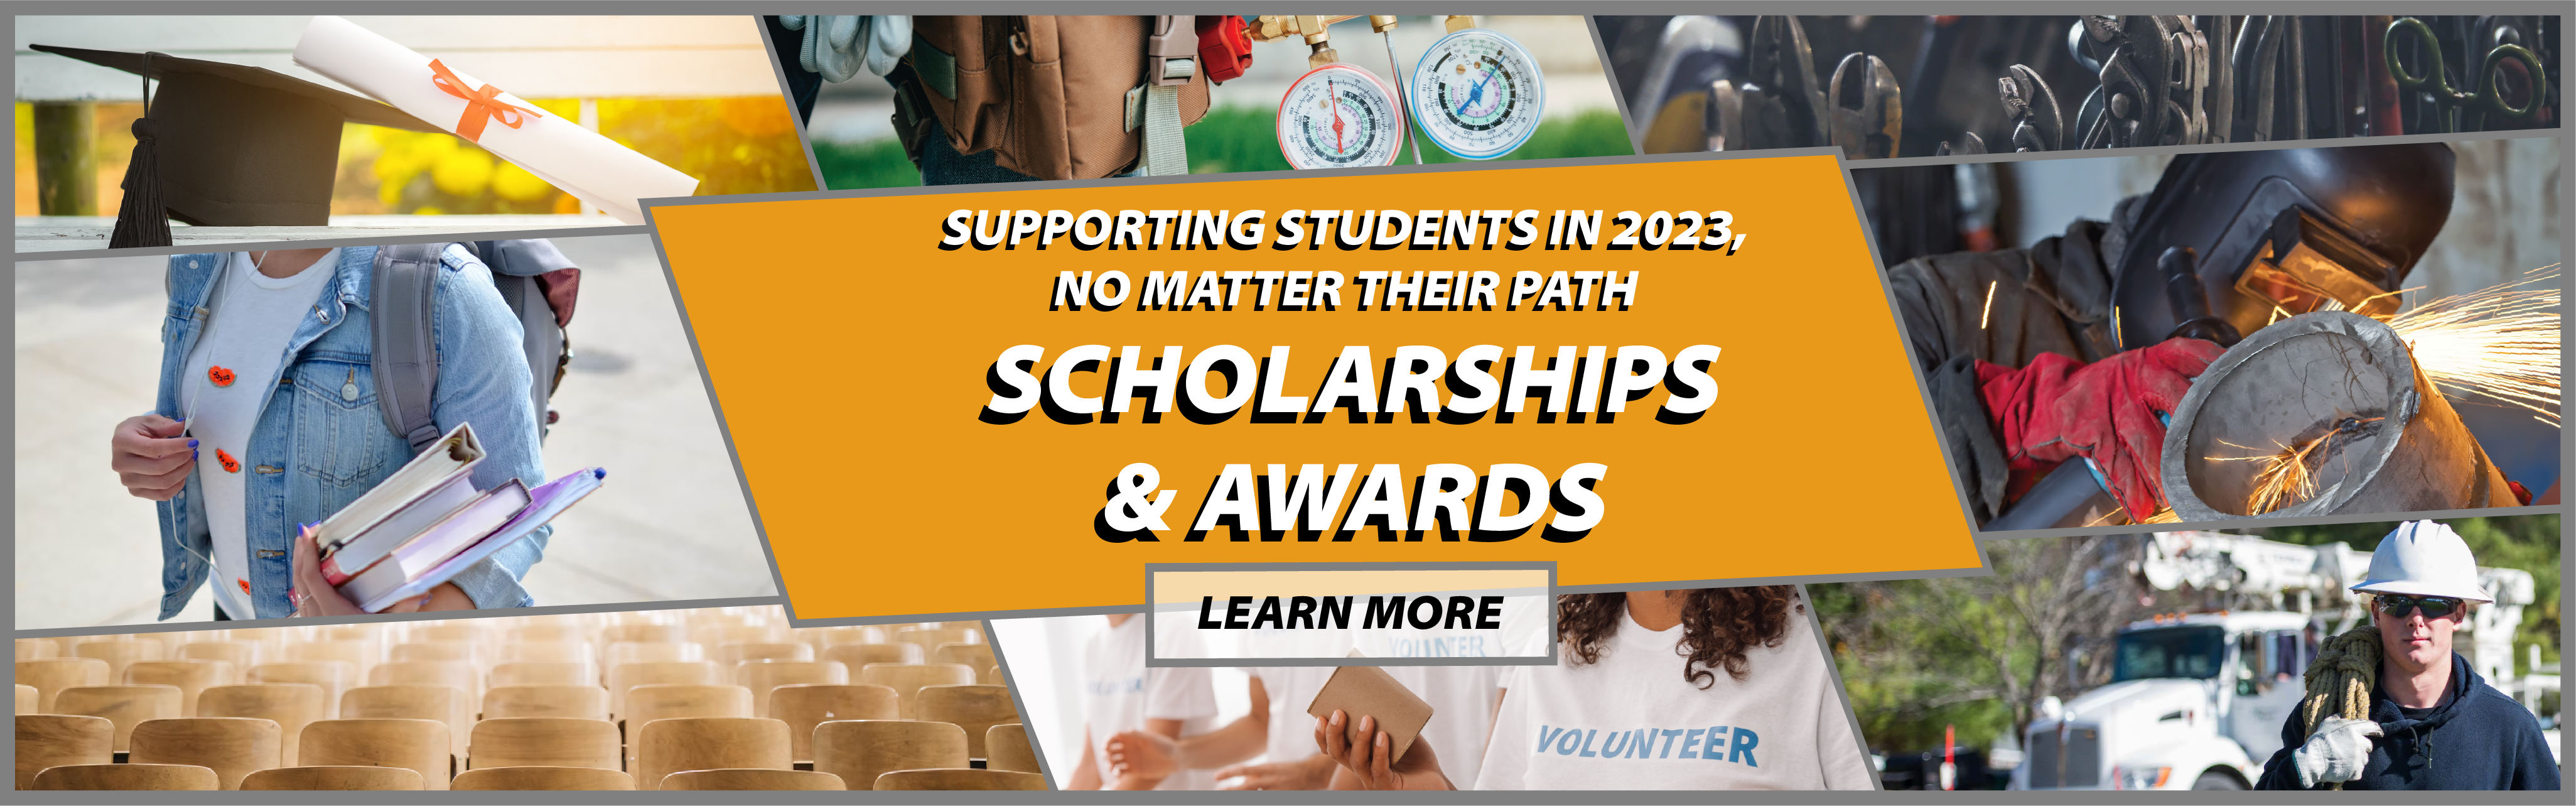 Supporting students in 2023, no matter their path... SCHOLARSHIPS AND AWARDS! Learn more at www.sussexrec.com/scholarships